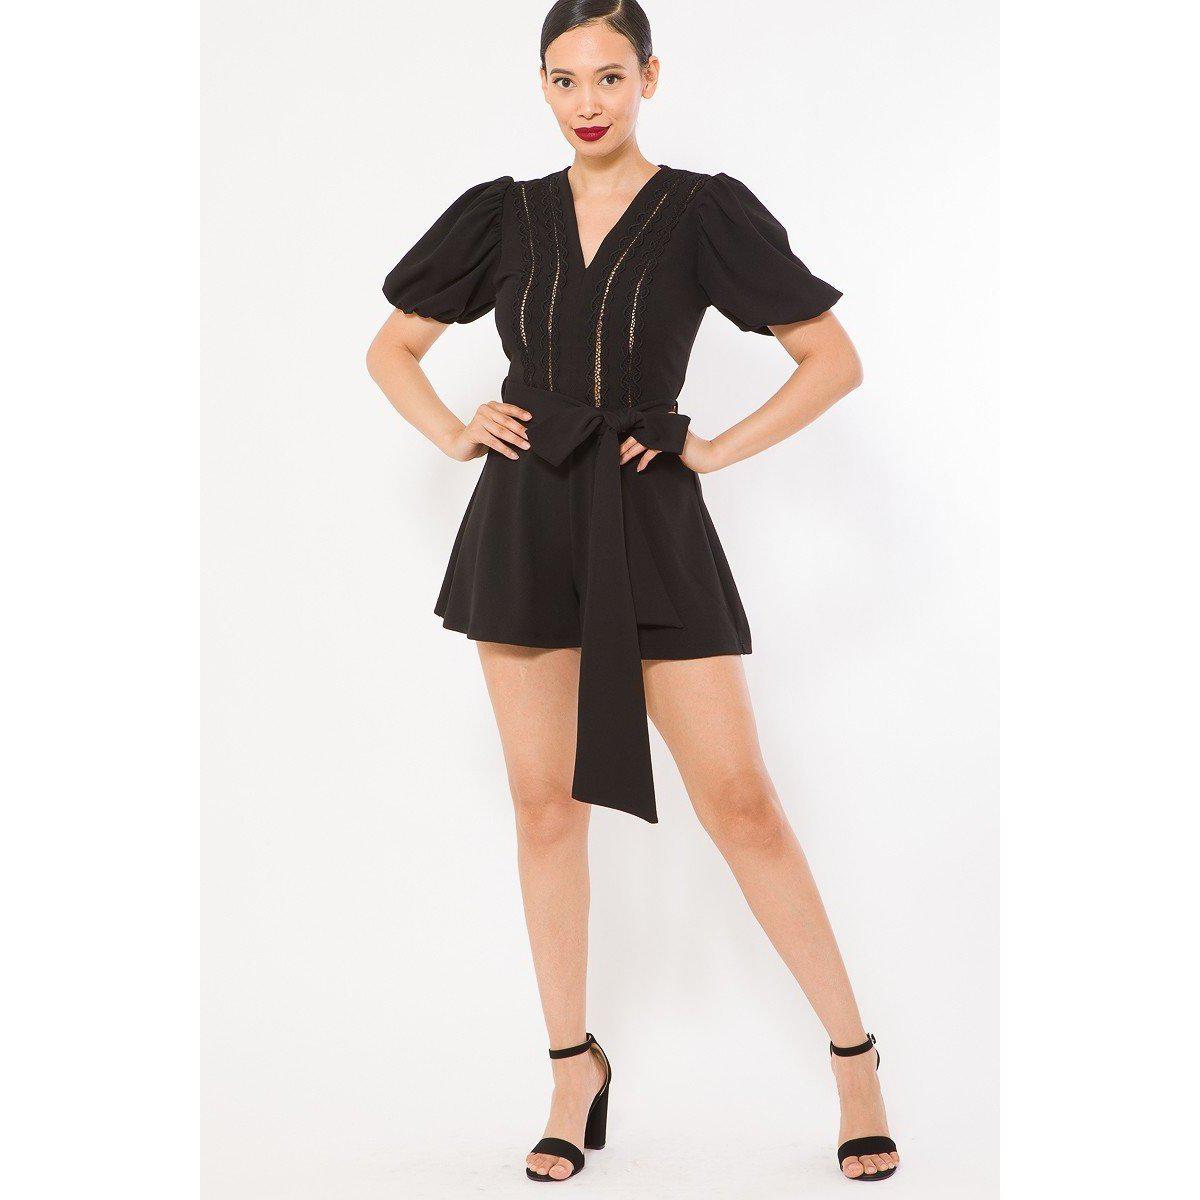 Crochet Detailed Fashion Romper-Jumpsuits & Rompers-NXTLVLNYC